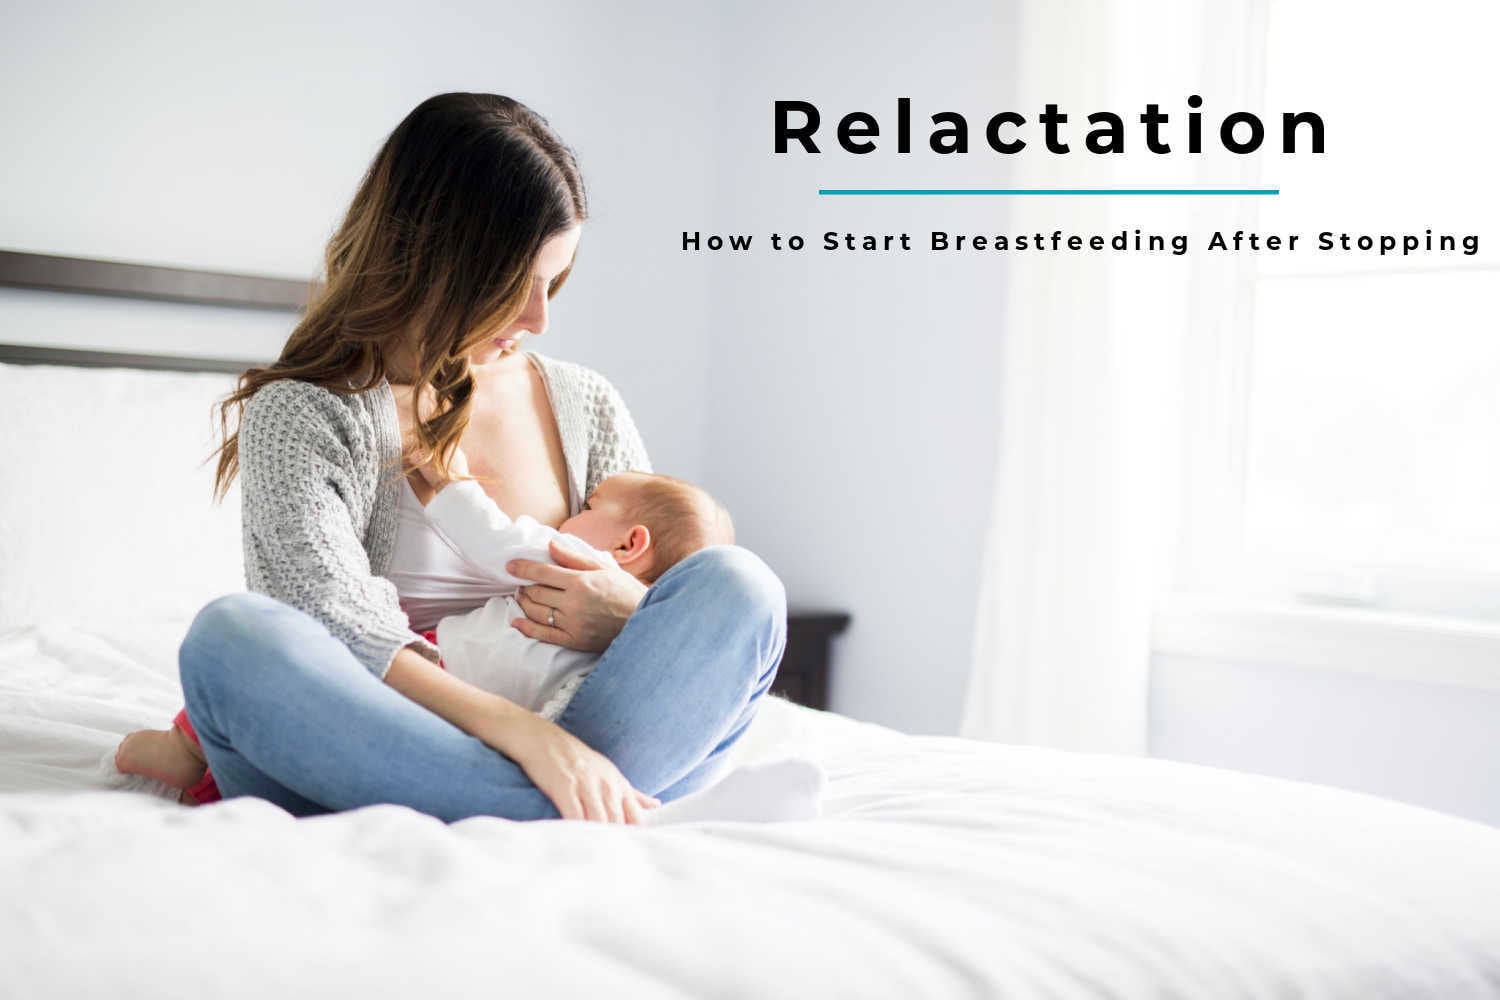 Relactation – Tips to Start Breastfeeding After Stopping